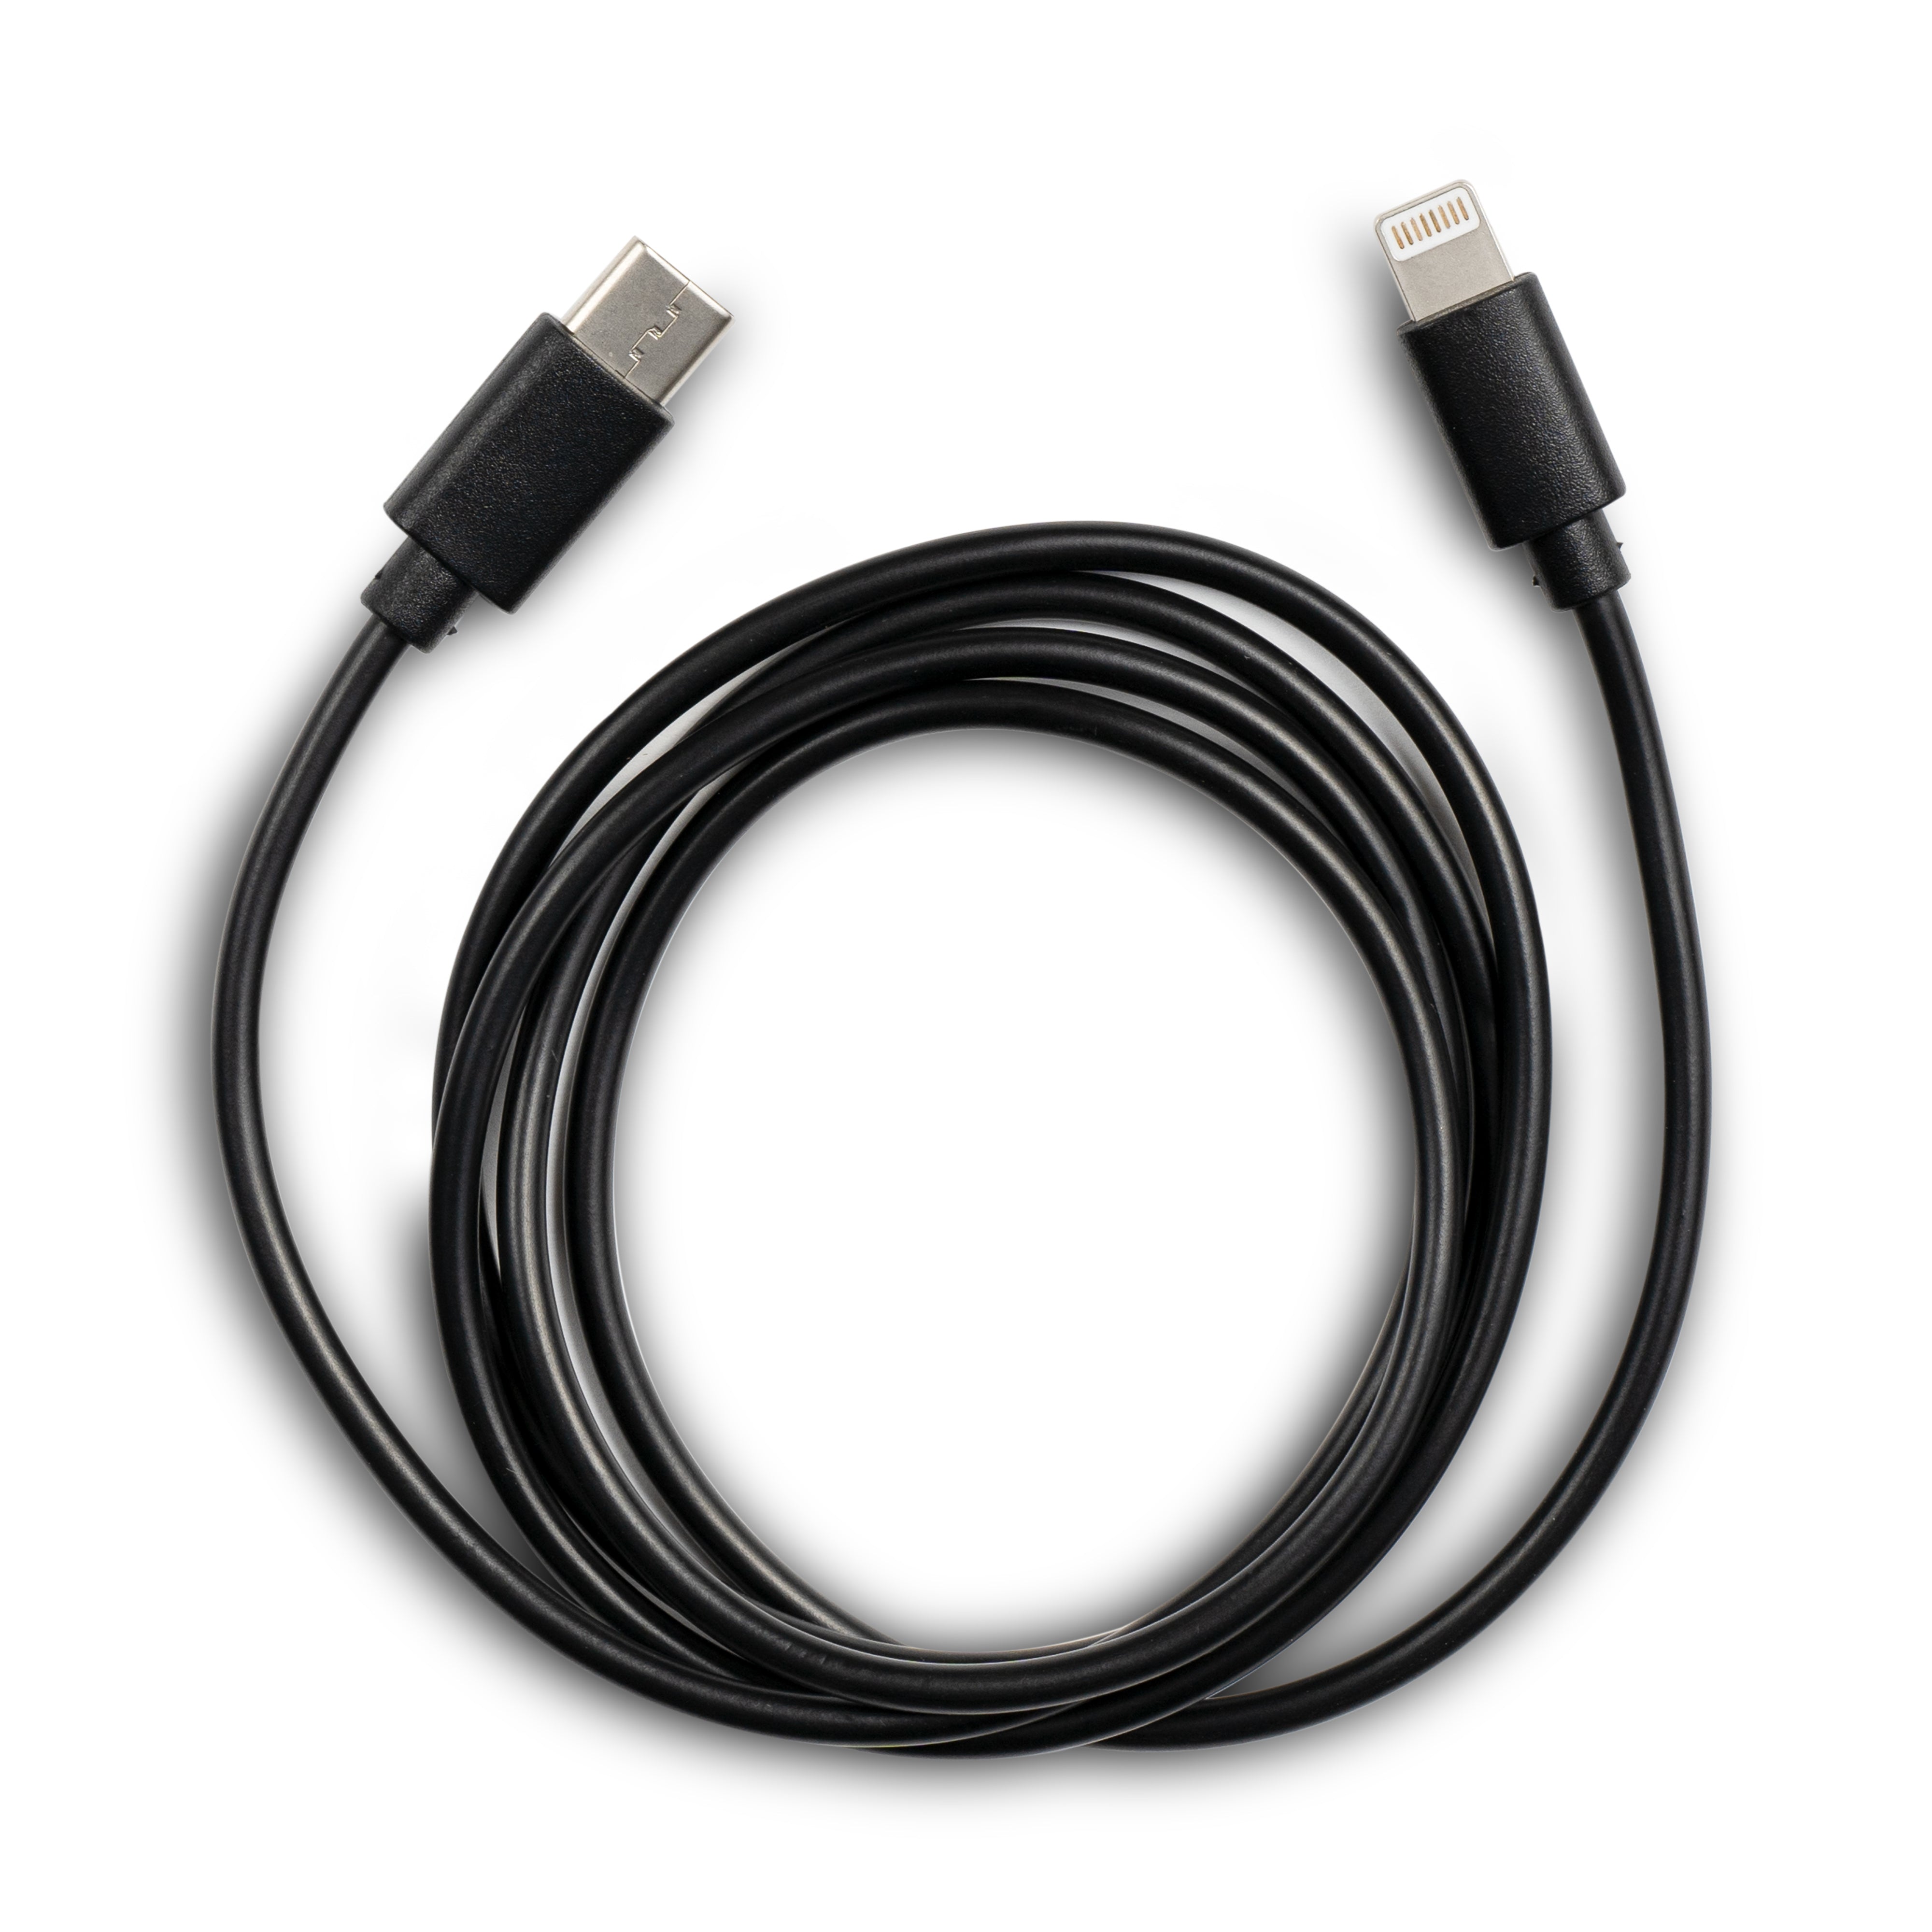 Cable iPhone Tipo C a Lightning Original 1m – Andino Tech